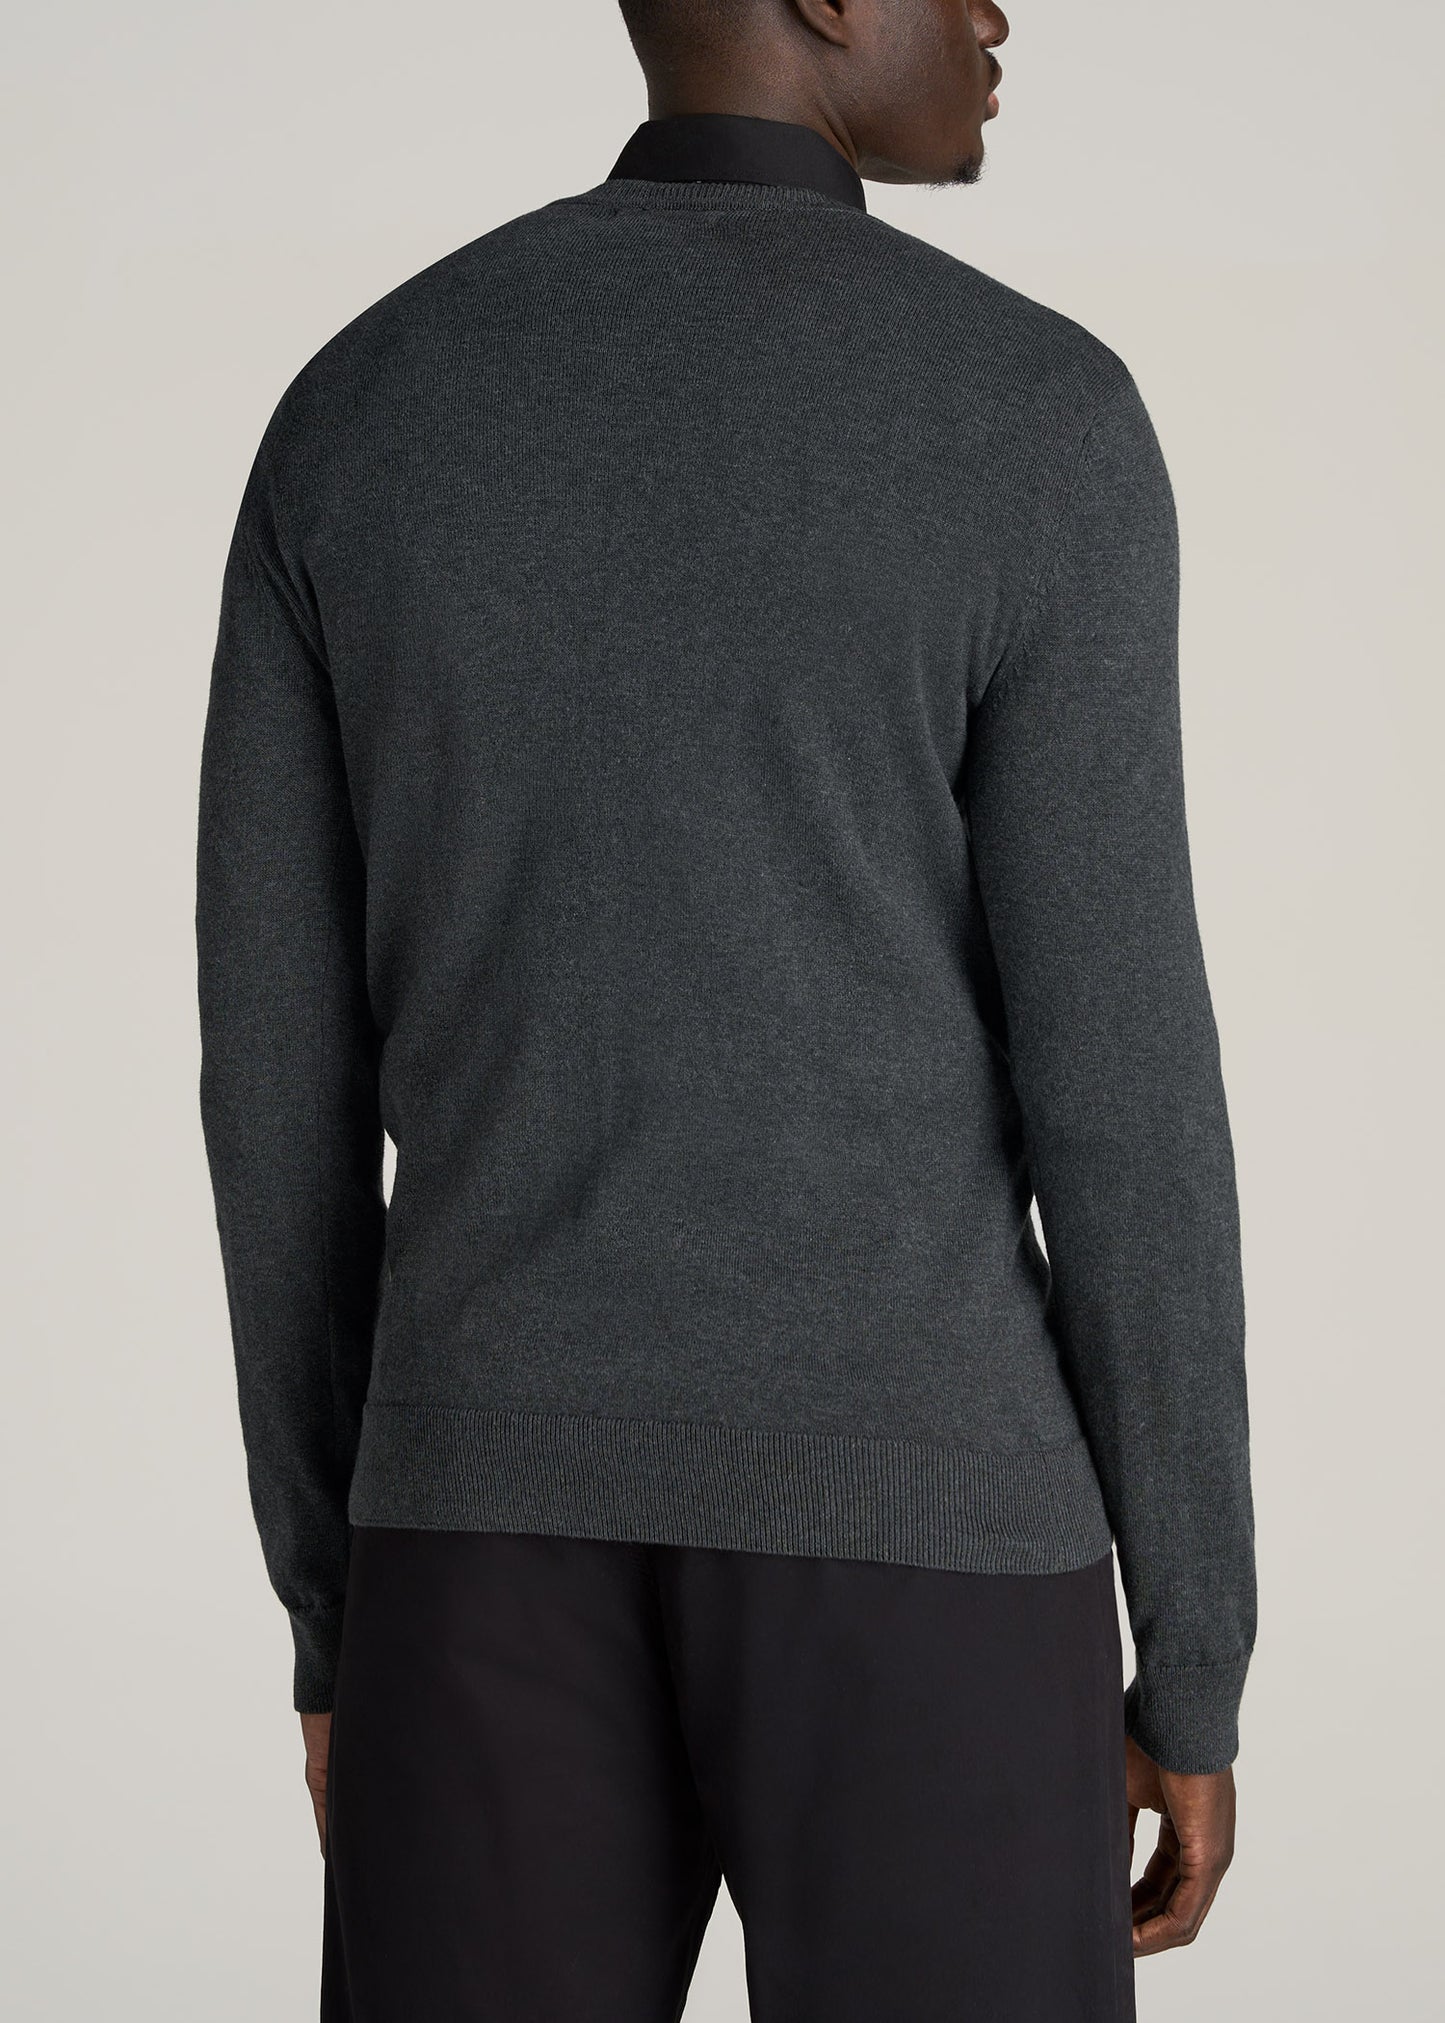    American-Tall-Men-Everyday-V-Neck-Sweater-Charcoal-back